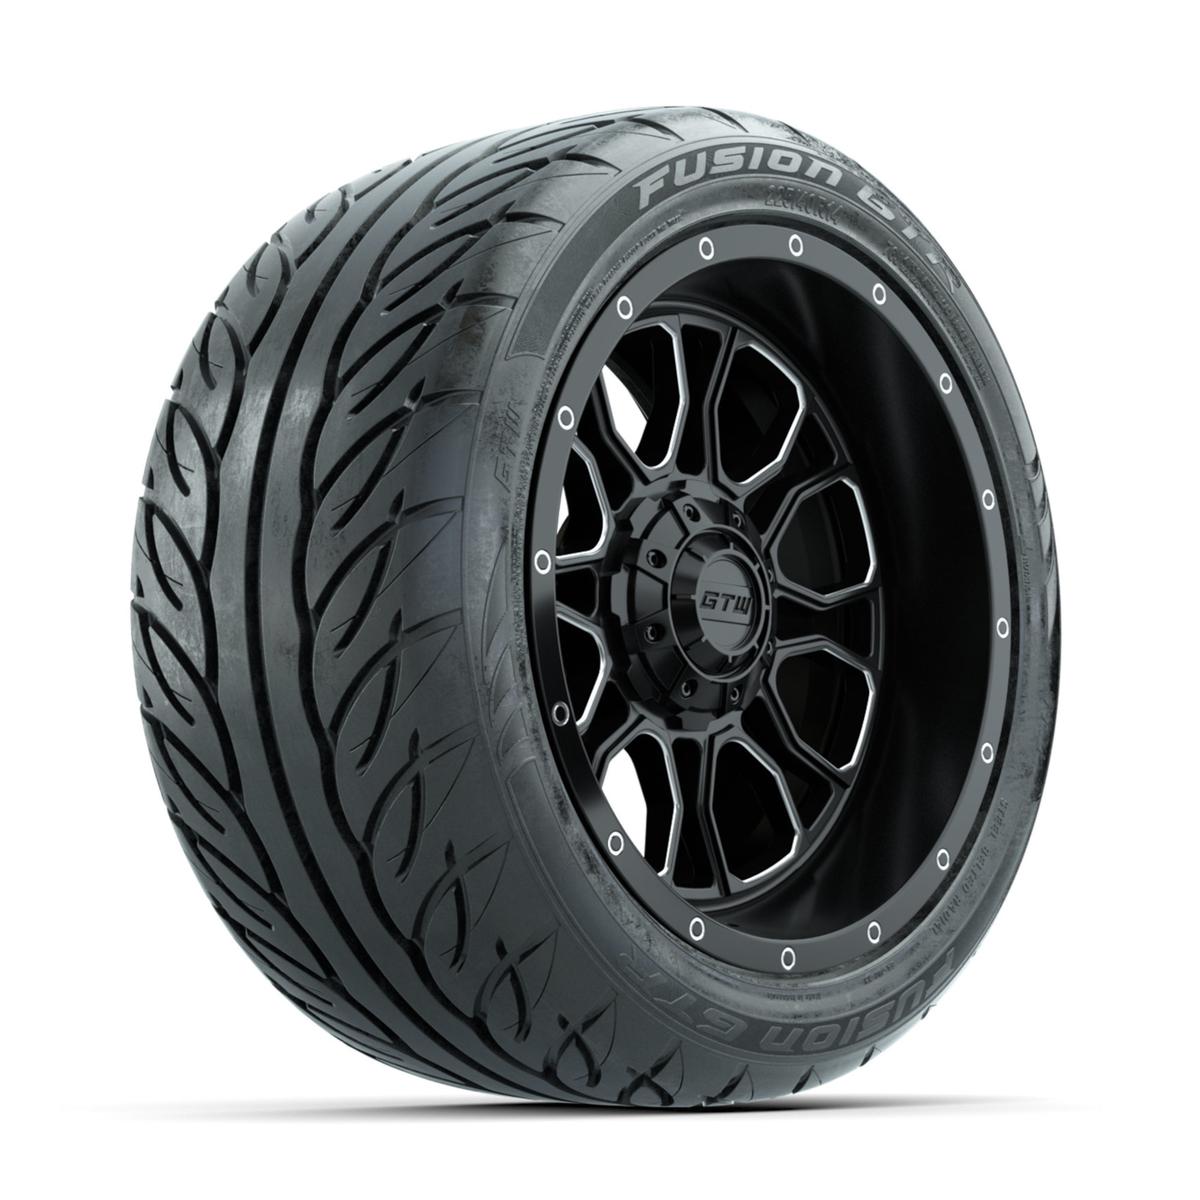 GTW Volt Machined/Black 14 in Wheels with 225/40-R14 Fusion GTR Street Tires – Full Set